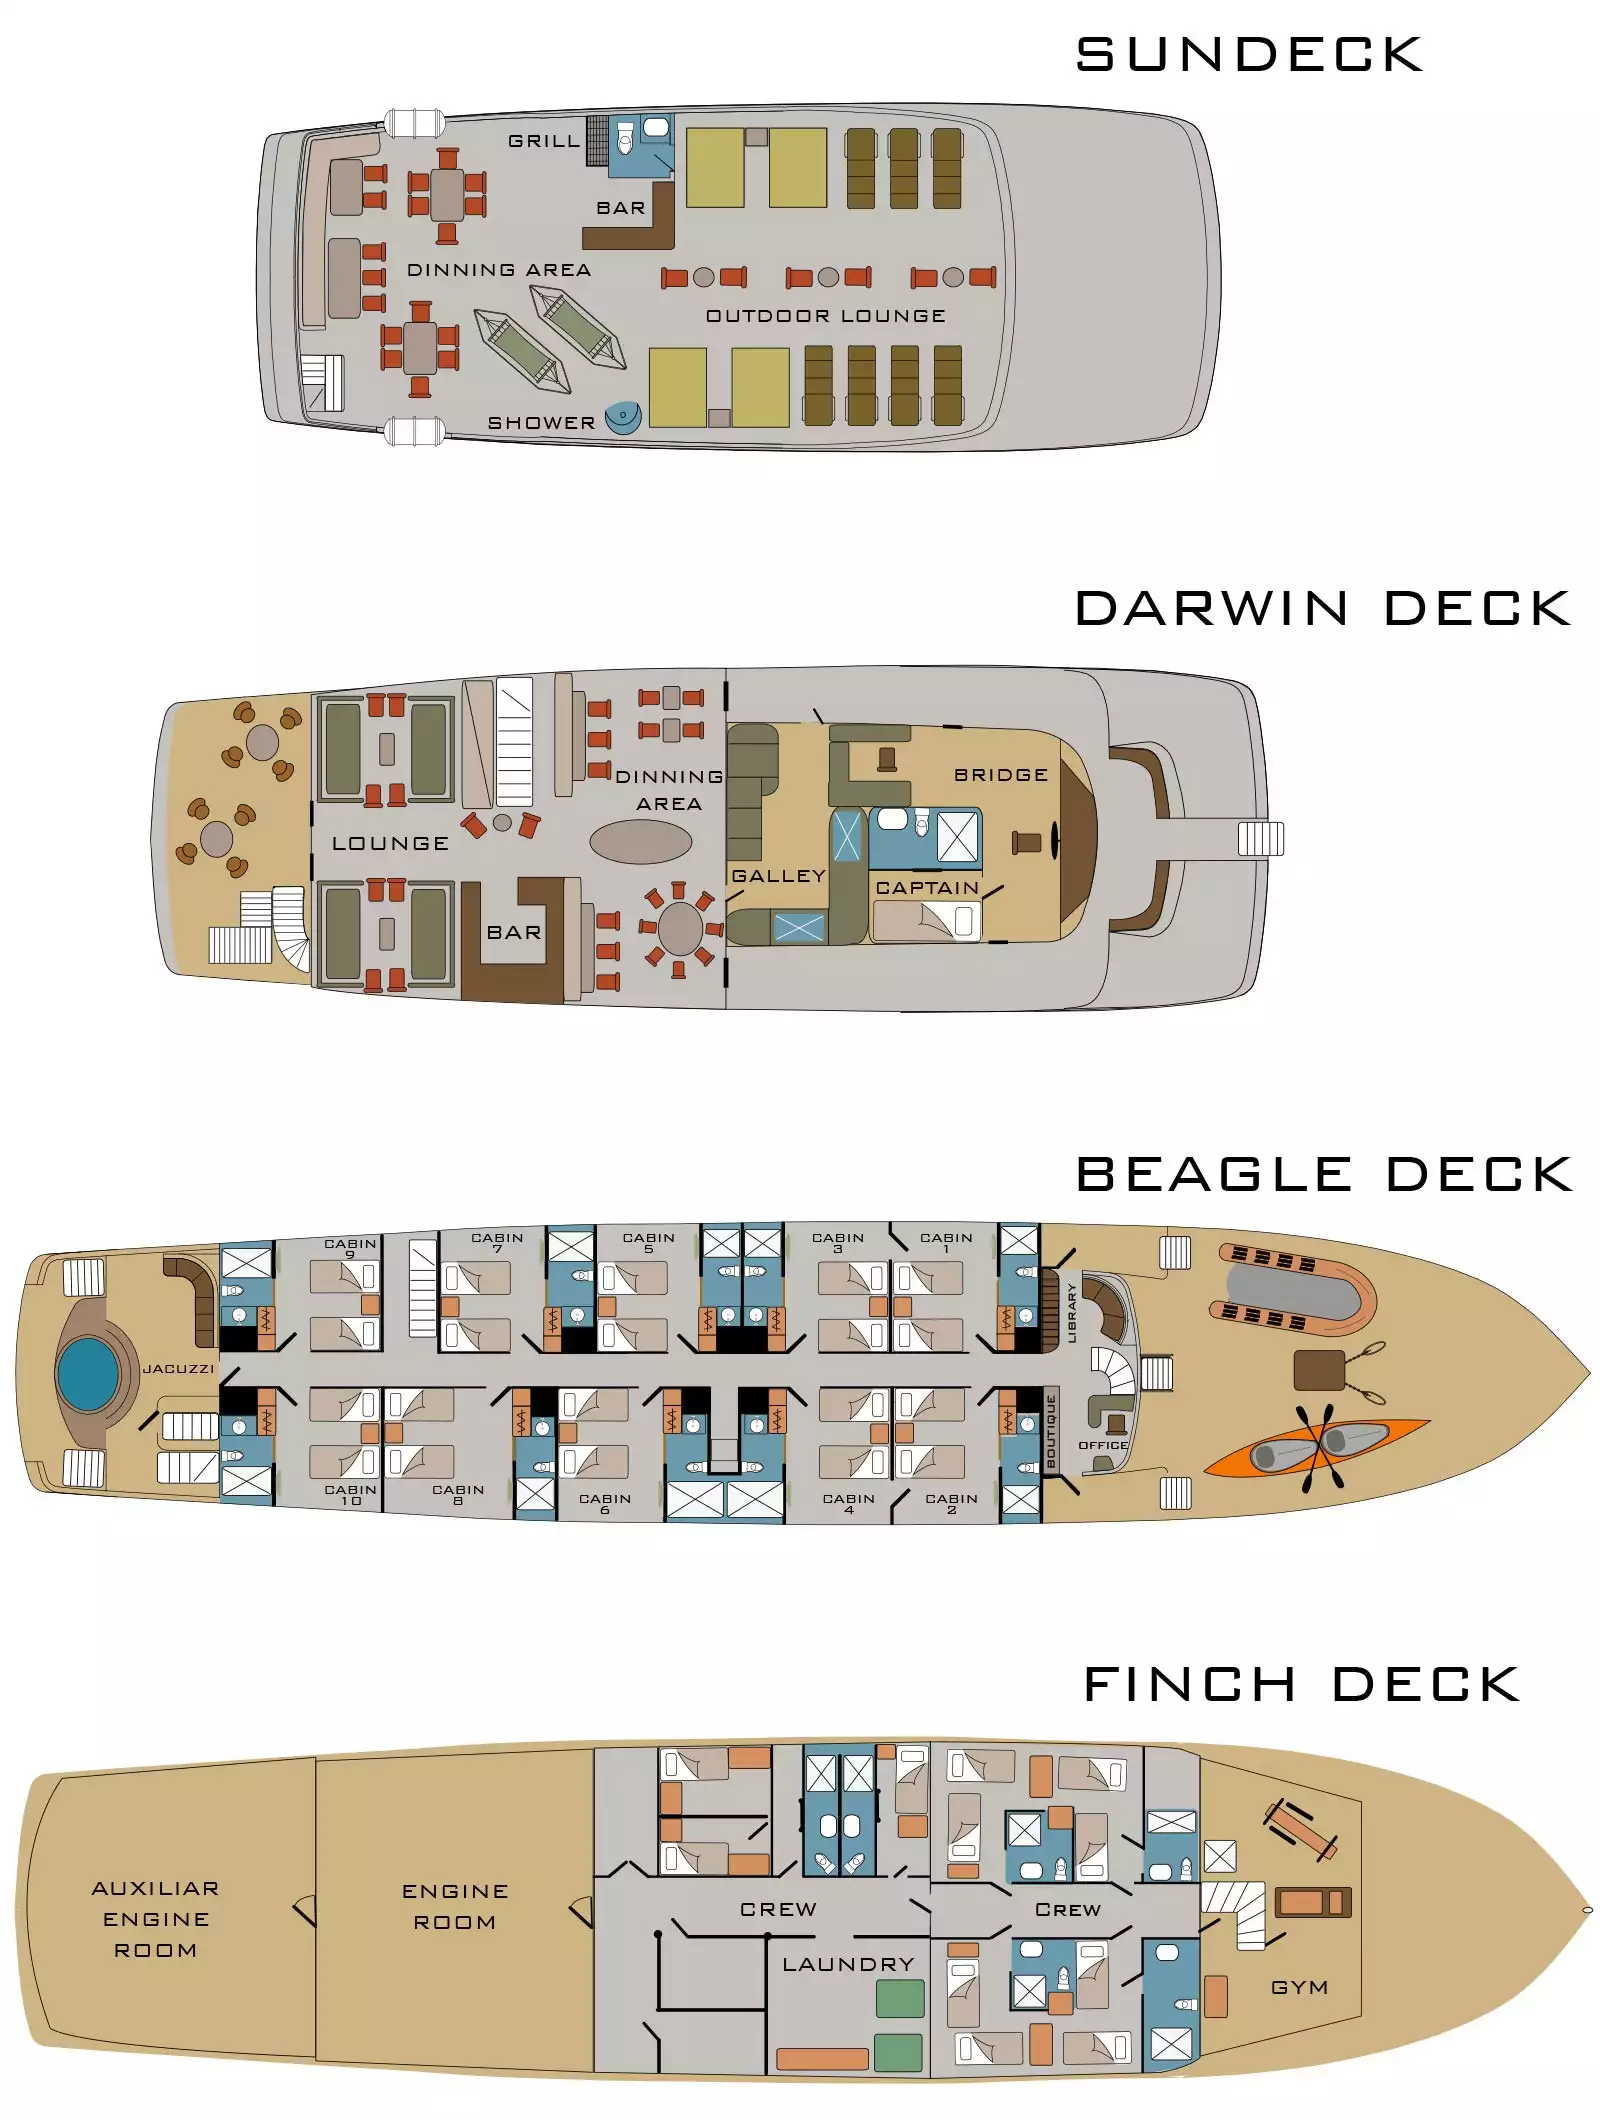 Deck plan of luxury Galapagos yachts Origin, theory & Evolve with 4 guest decks, 10 cabins & various social spaces.